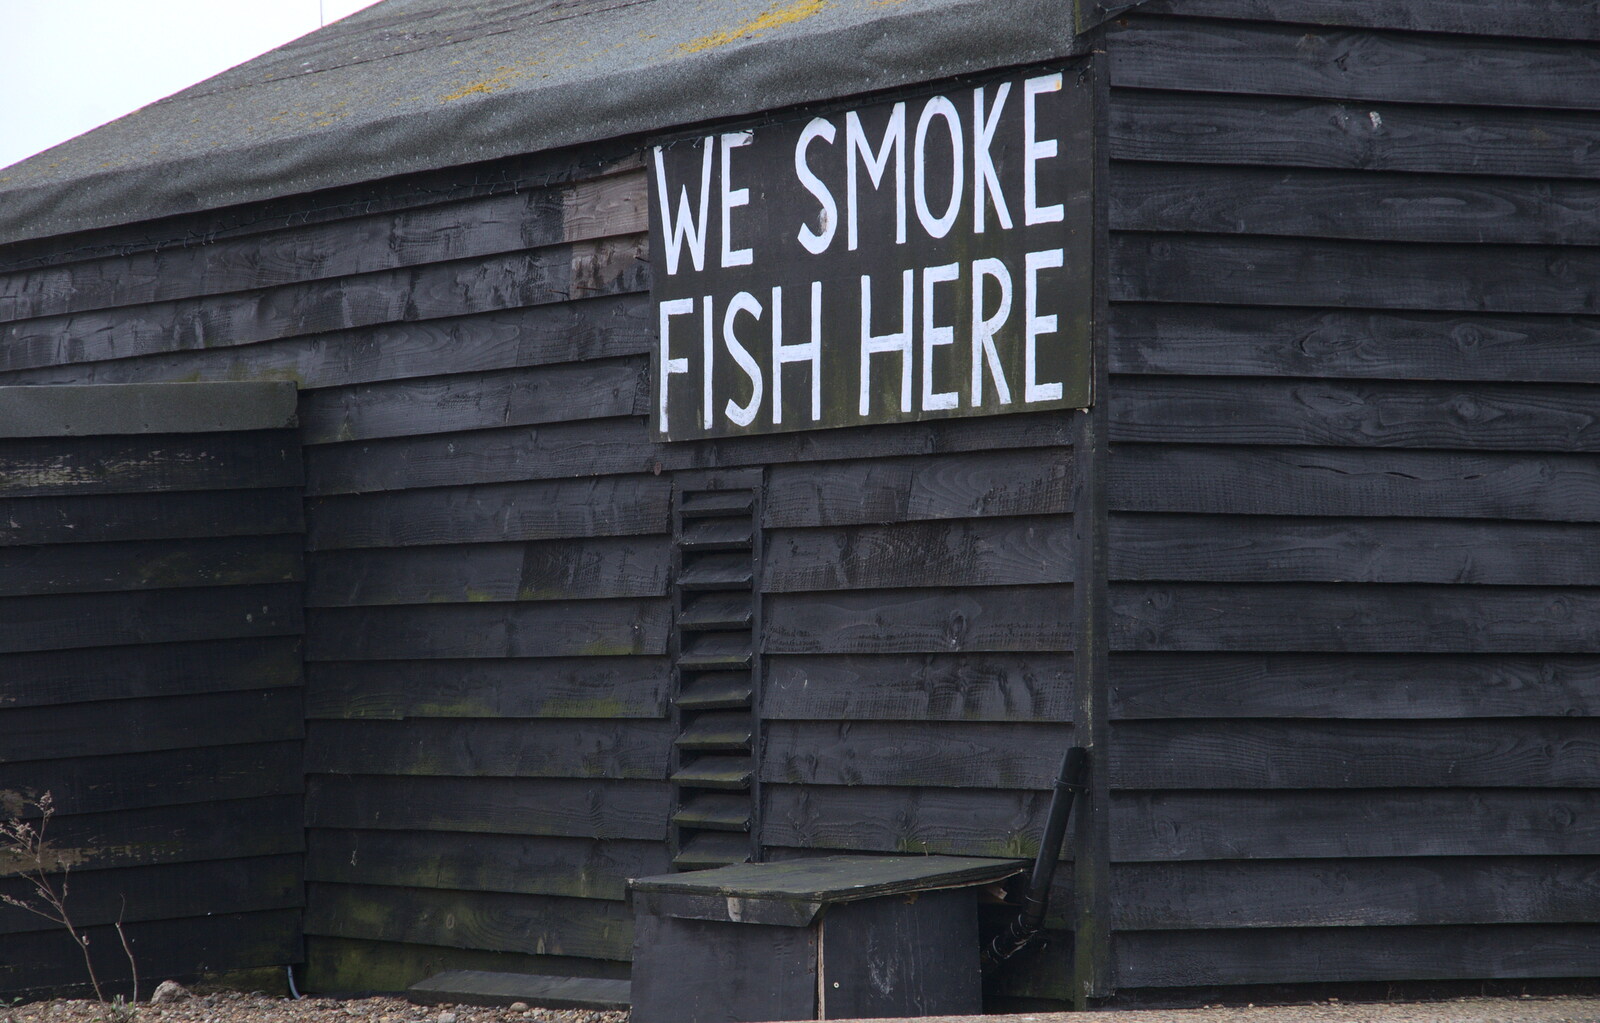 Smoking fish is an improvement on smoking tobacco from A Postcard from Aldeburgh, Suffolk - 6th January 2019